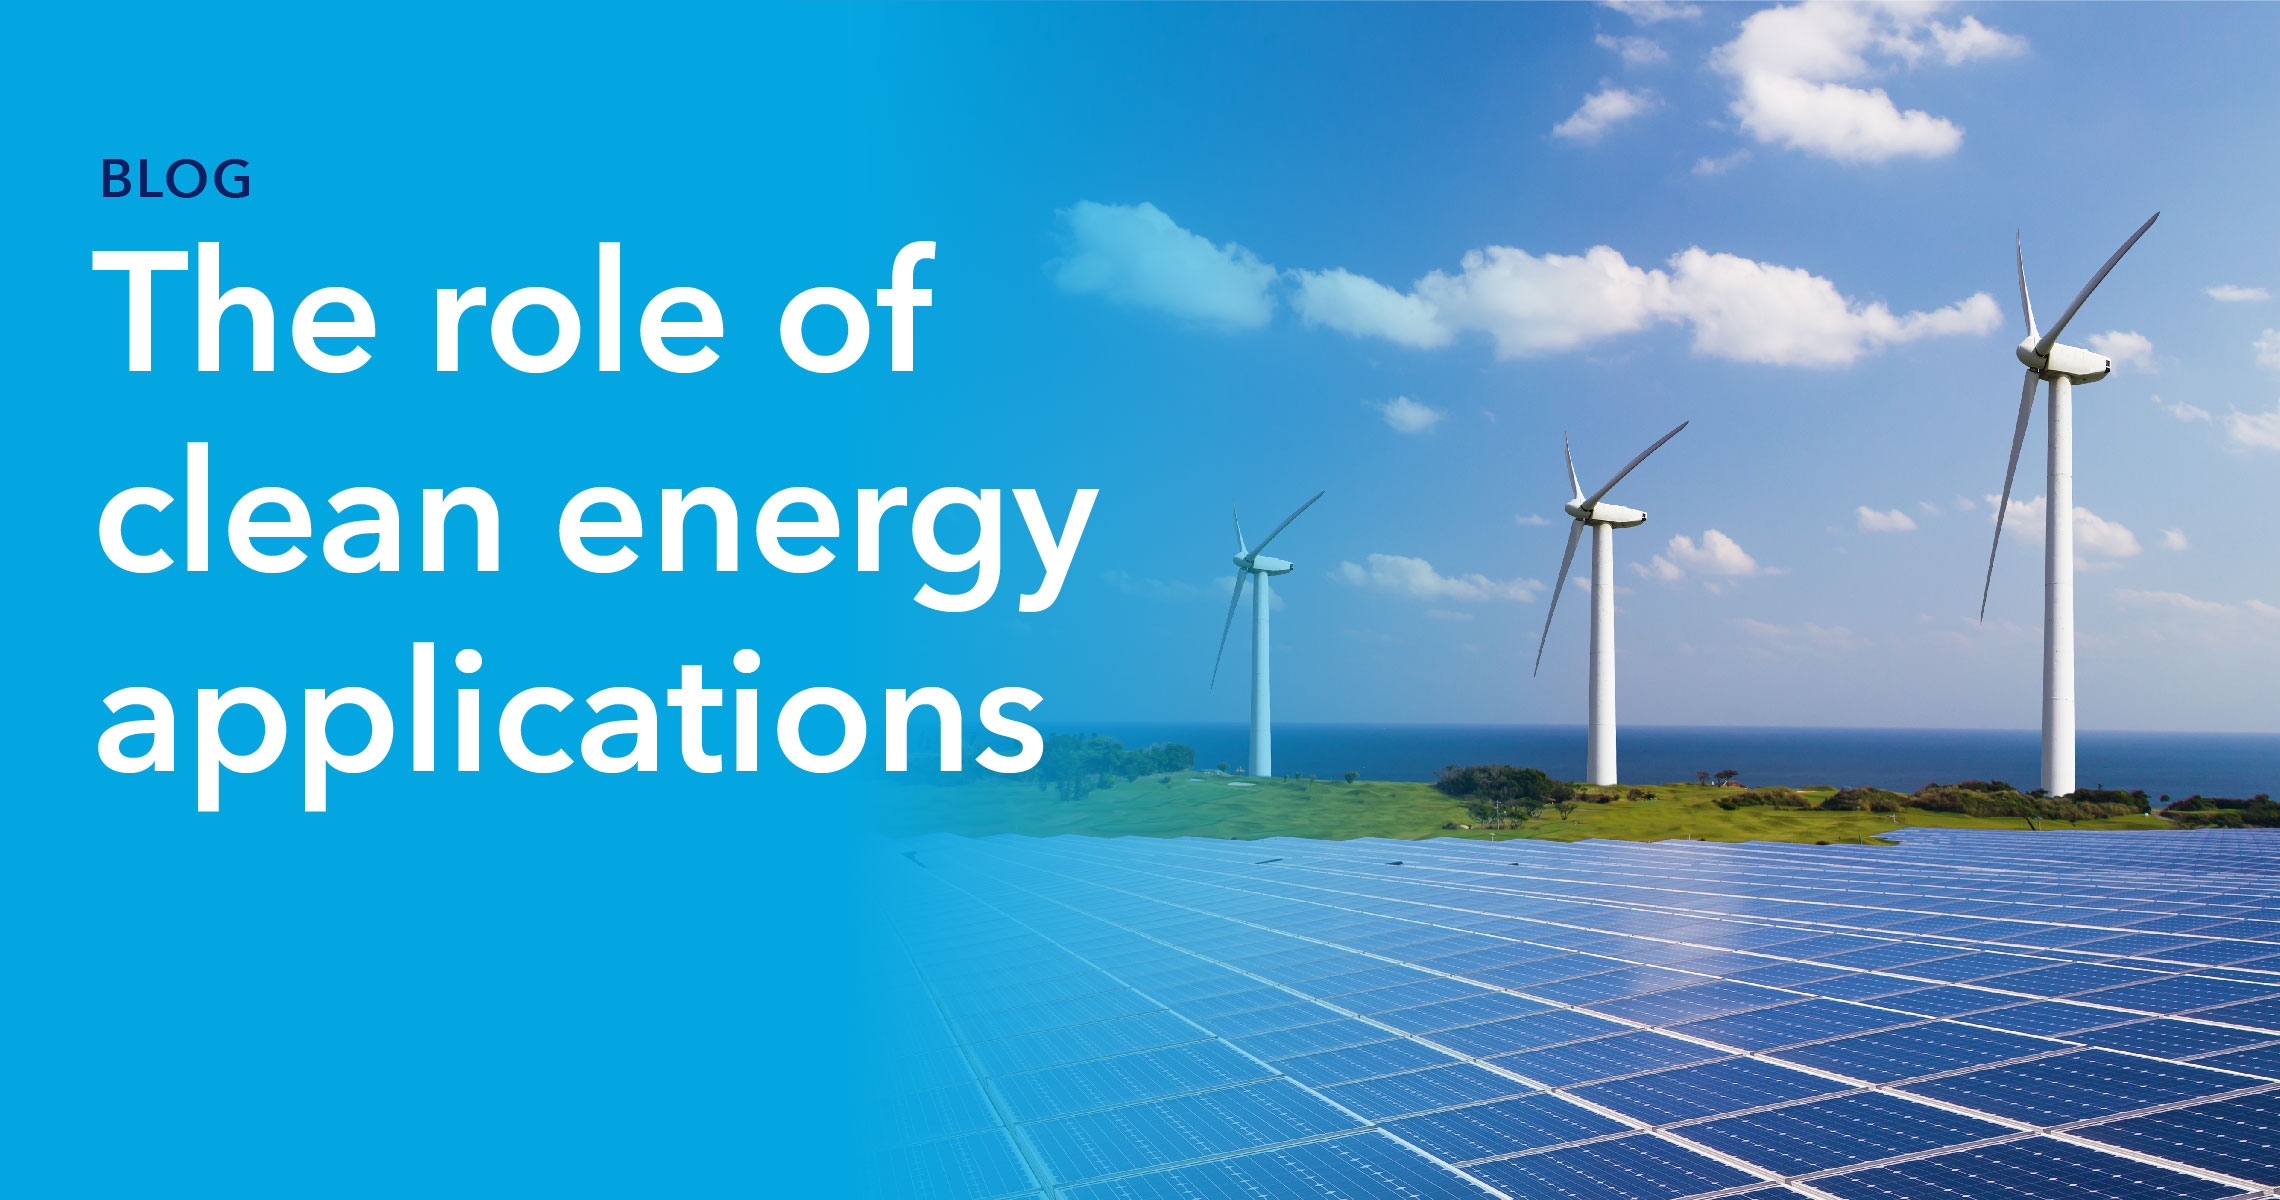 Blog header- The role of clean energy applications